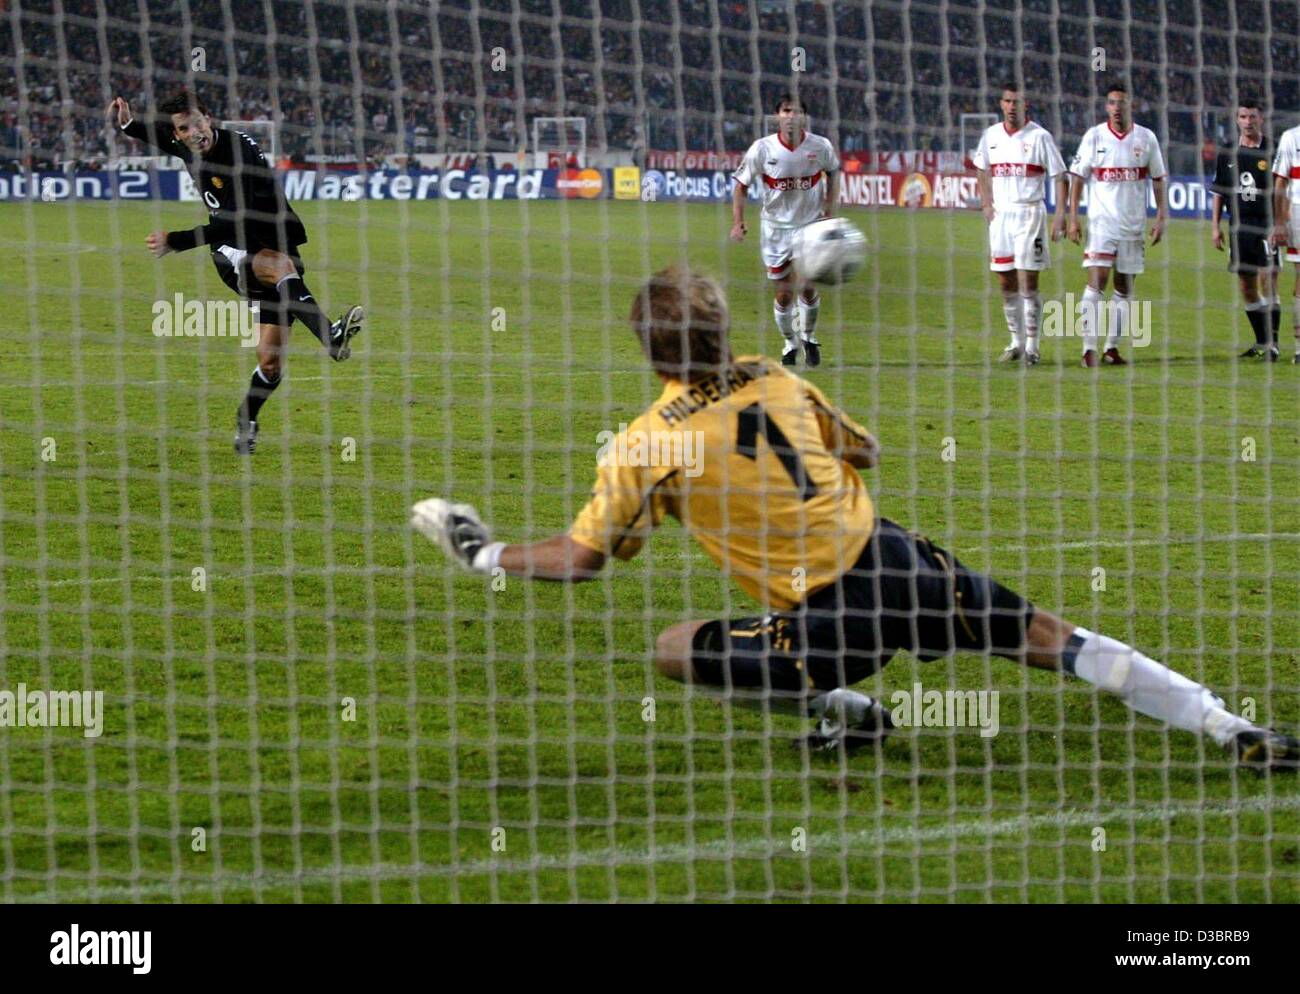 (dpa) - Stuttgart's goalkeeper Timo Hildebrand (front) has no chance to save the penalty shot of Manchester's Dutch player Ruud van Nistelrooy (L), during the second group game of the European soccer Champions League opposing VfB Stuttgart and Manchester United in Stuttgart, Germany, 1 October 2003. Stock Photo